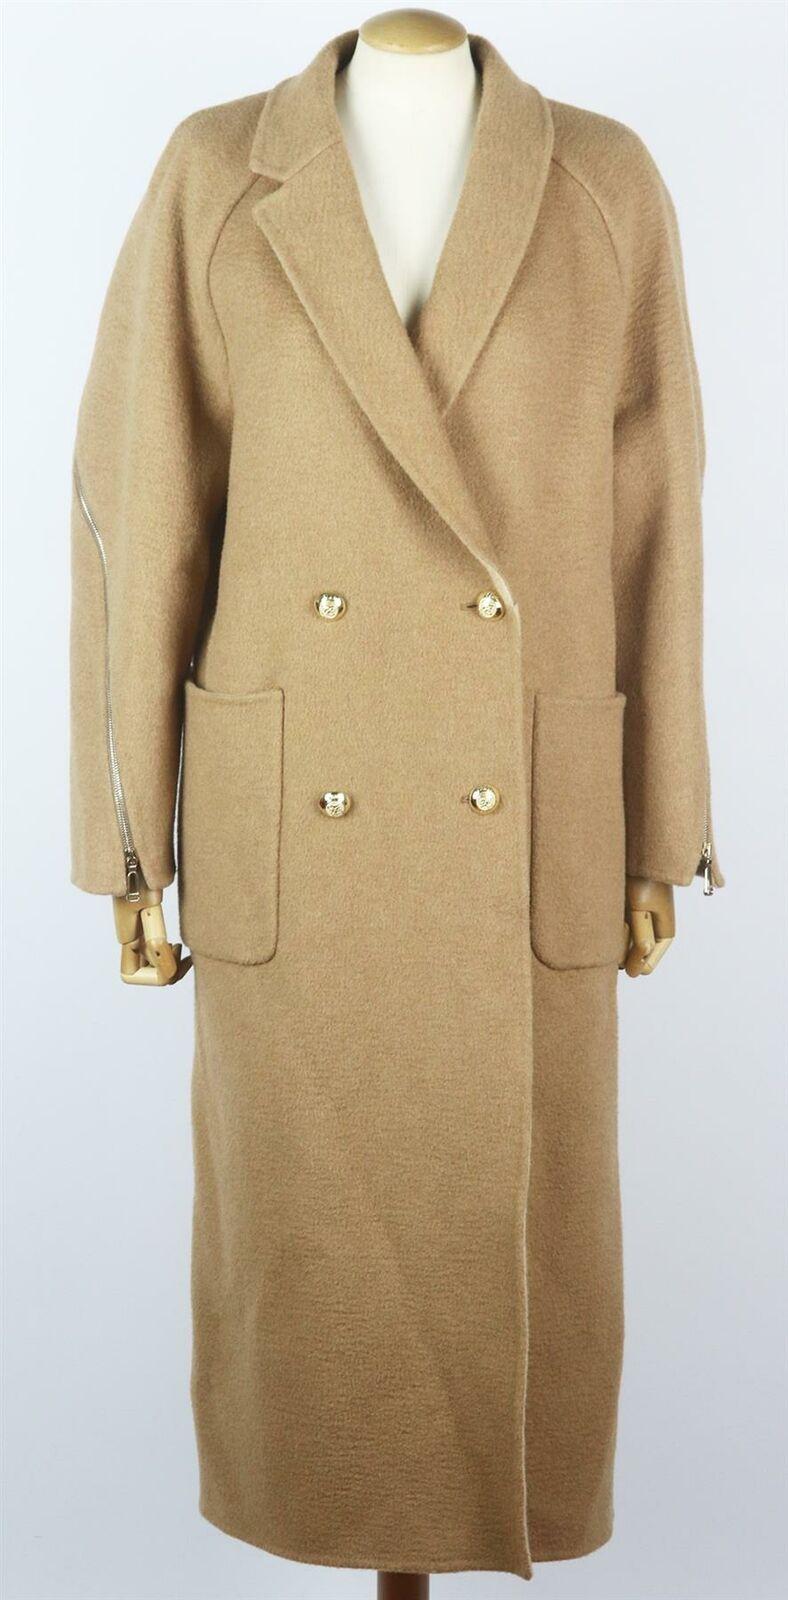 Simply put, Fendi's coat is beautiful and timeless, it's been made in Italy from luxurious camel hair and tailored in a classic double-breasted silhouette that's punctuated with two rows of embossed gold-tone buttons and zips.
Beige